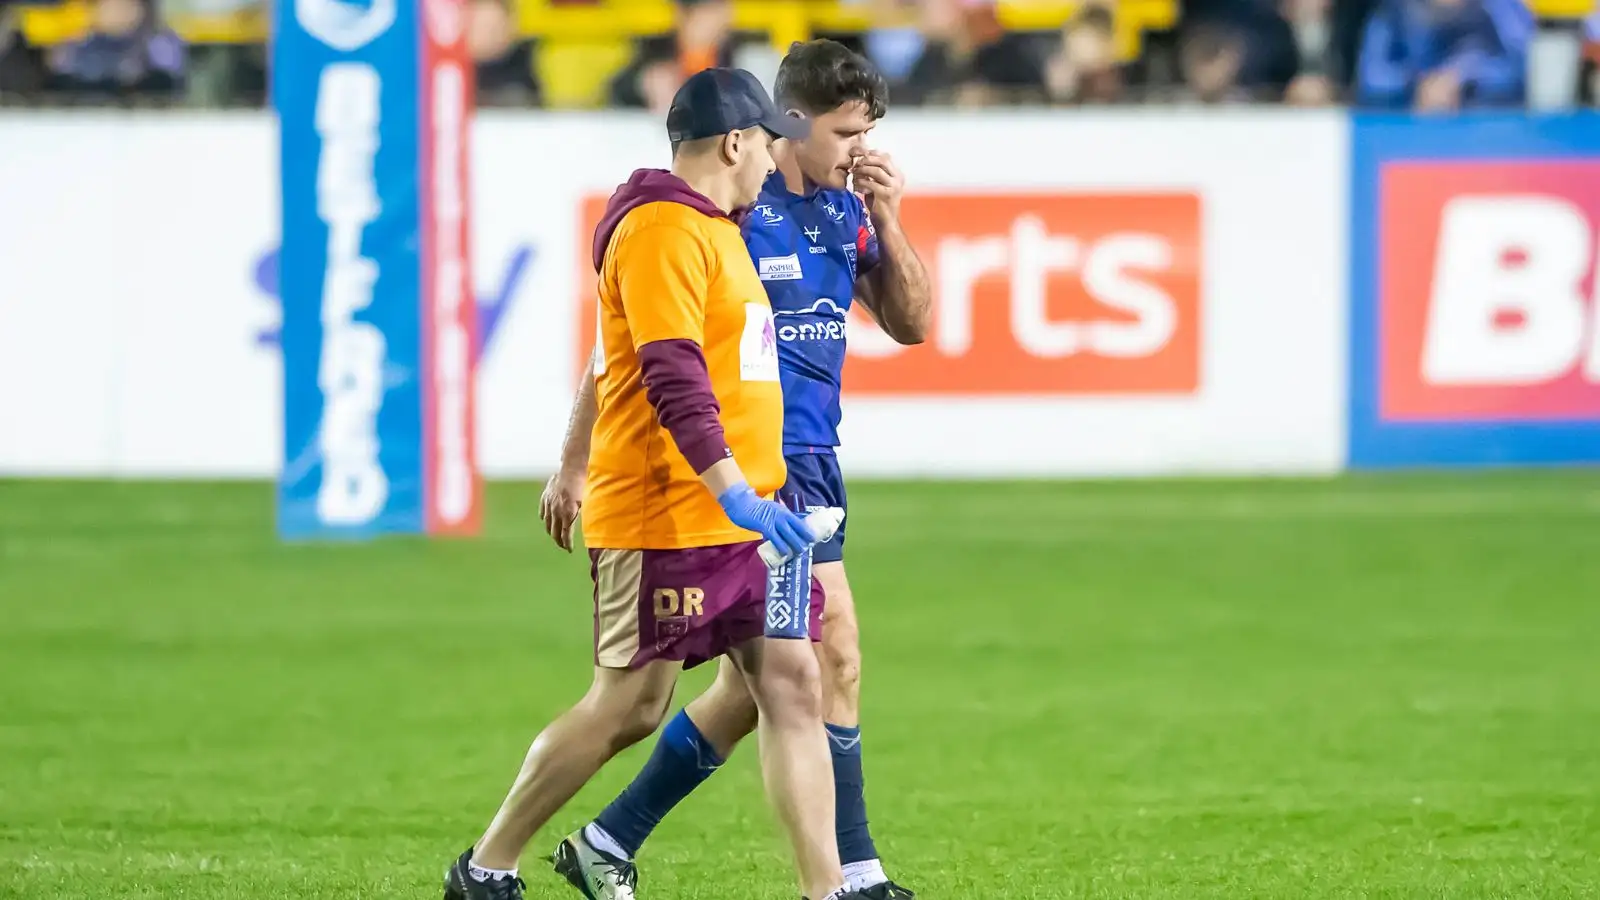 Hull KR confirm injury blow to full-back Lachlan Coote